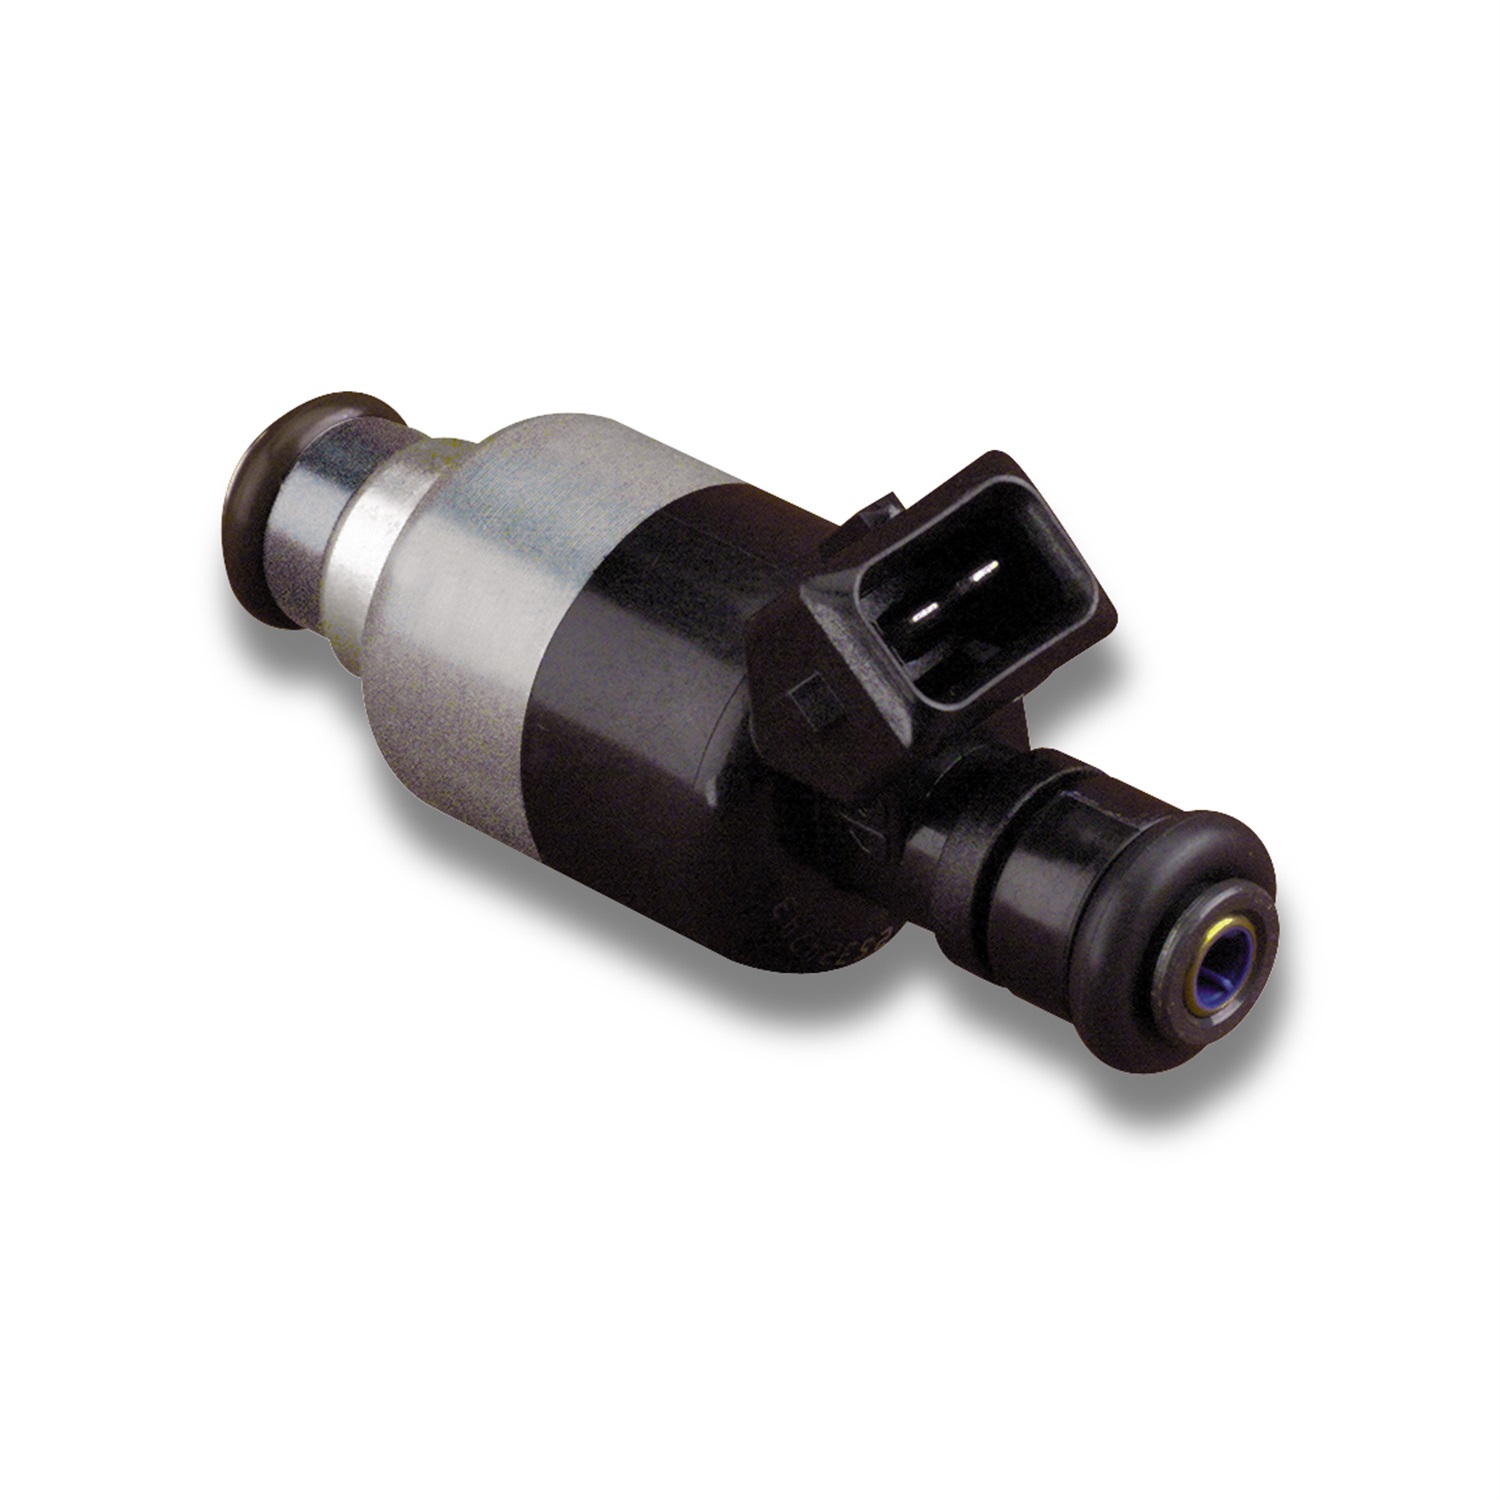 Holley Performance Holley Performance 522-421 Universal Fuel Injector